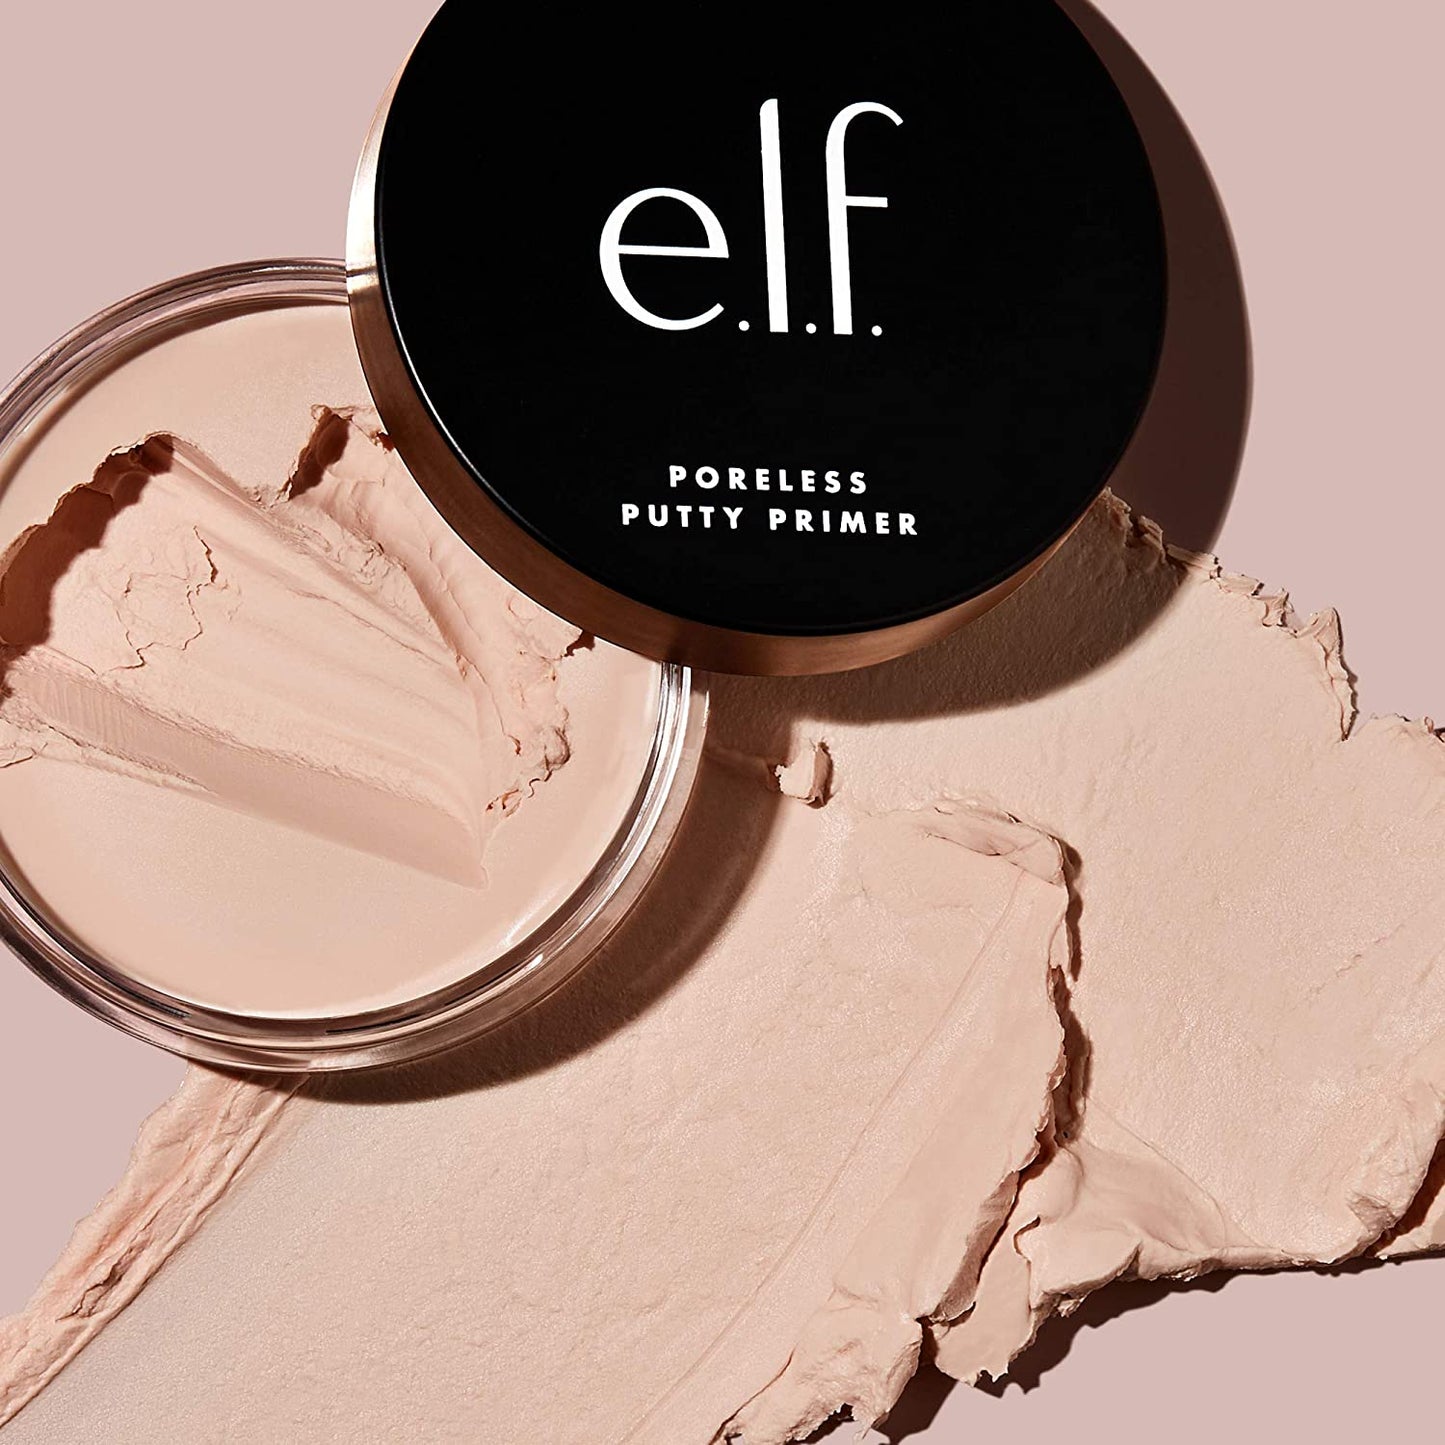 e.l.f. Poreless Putty Primer, Silky, Skin-Perfecting, Lightweight, Long Lasting, Smooths